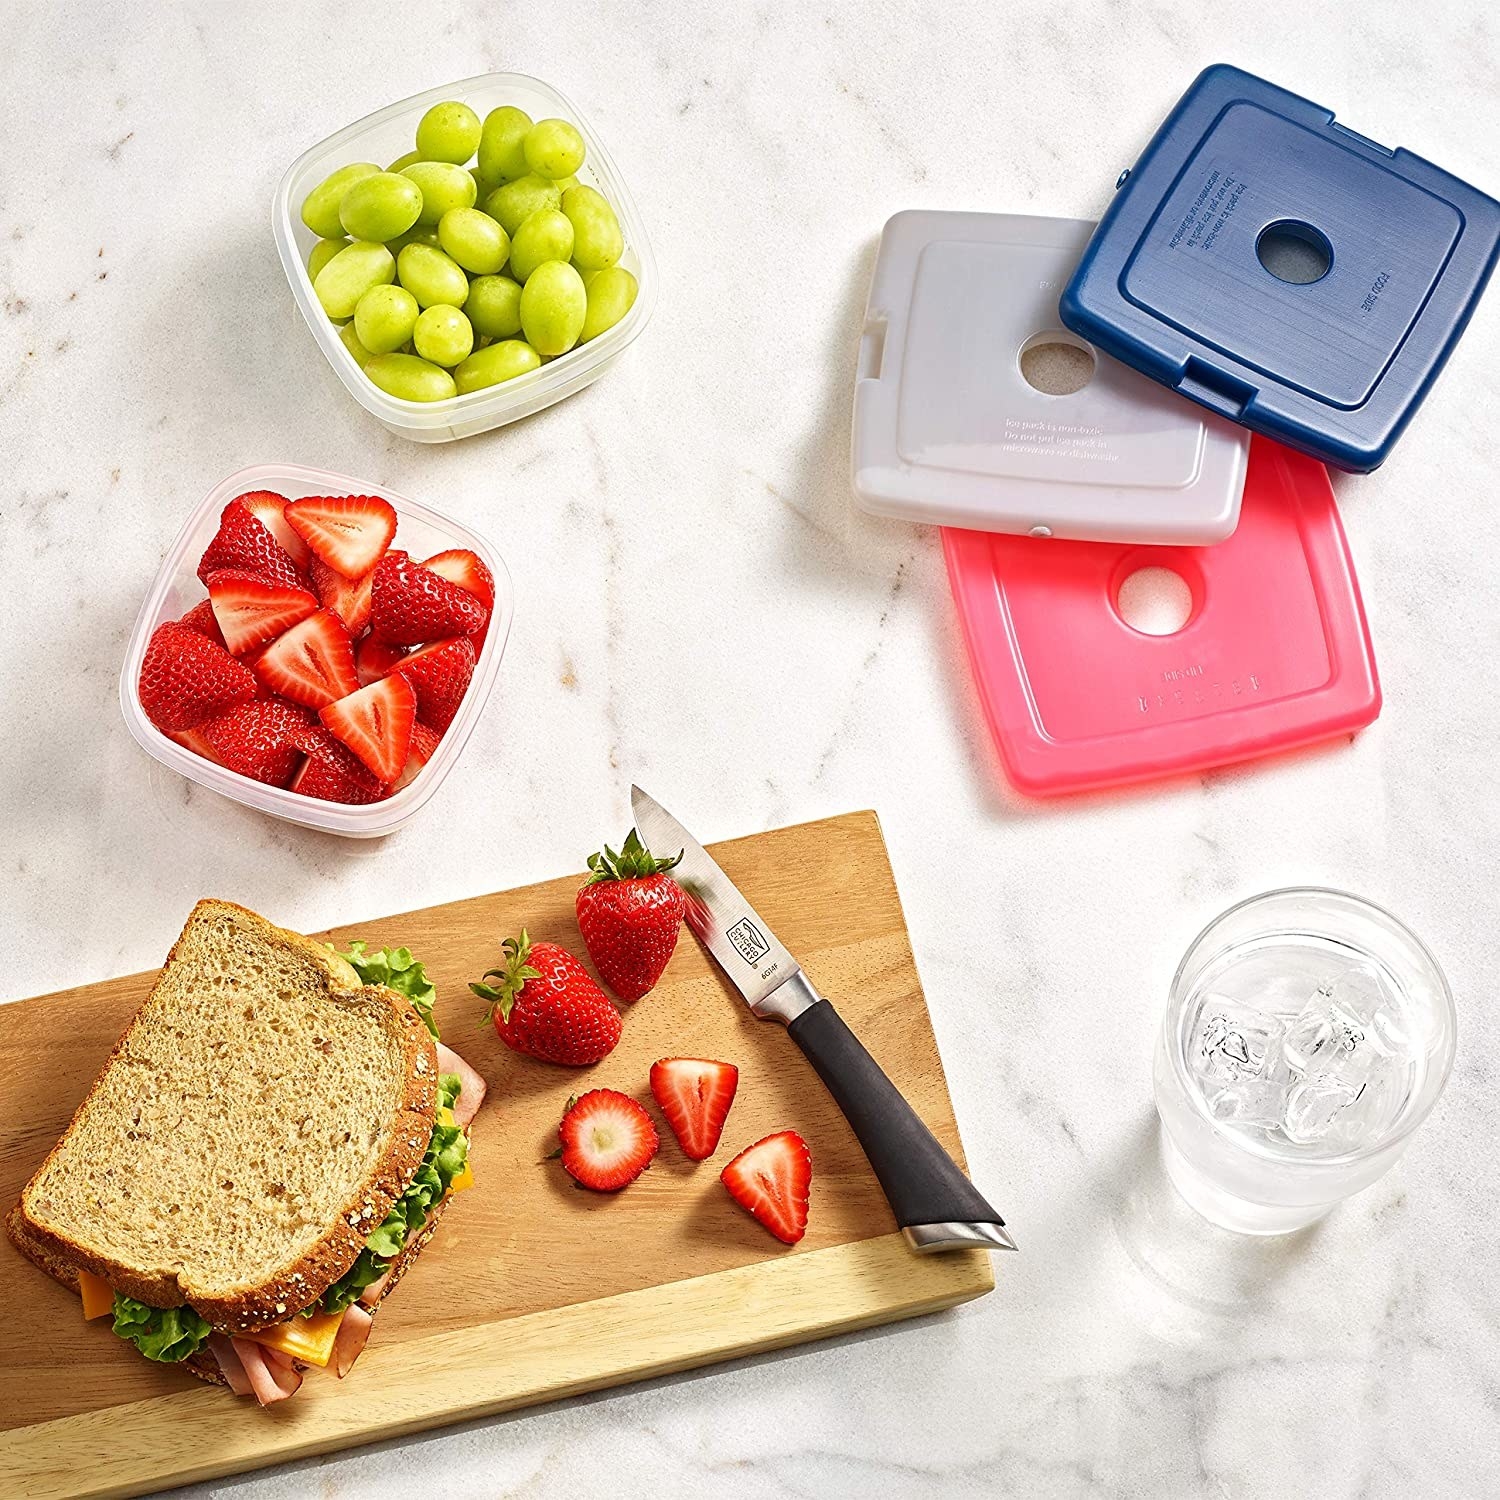 The ice packs surrounding fruit and a sandwich